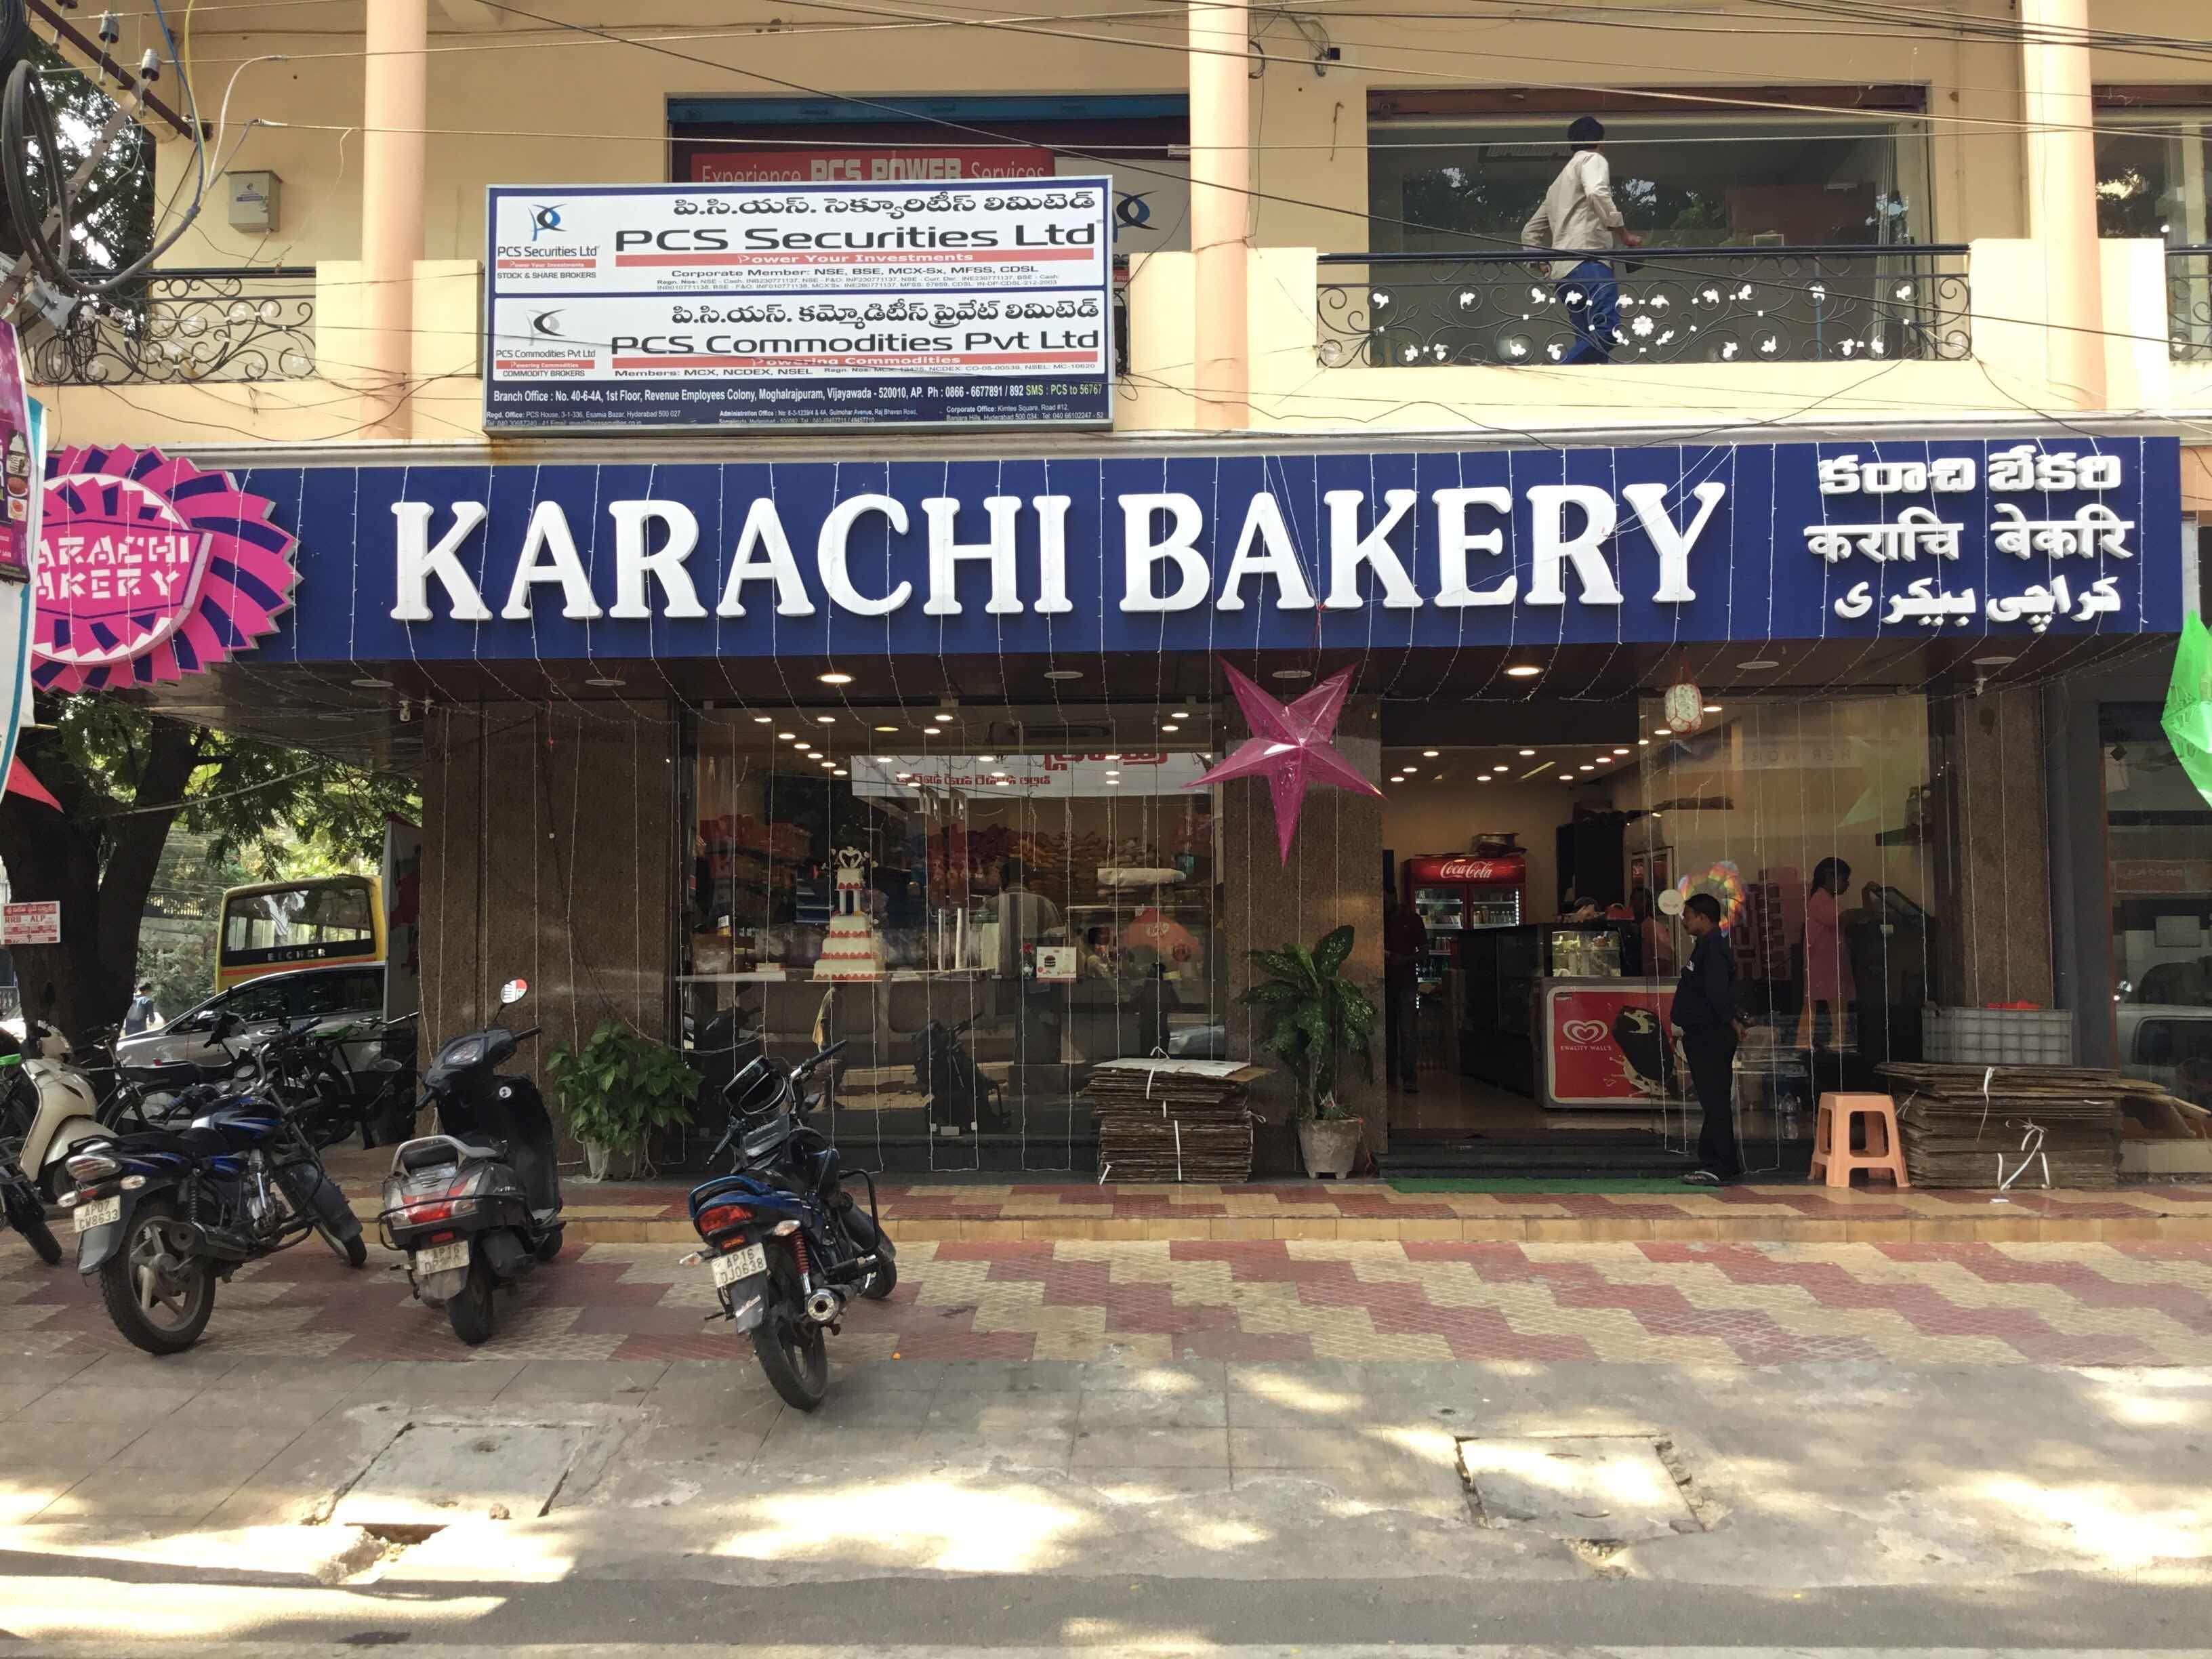 Hindi Bakery Advertisement - How to start a bakery business in Nigeria (2020) | Daily ... : Also check out latest bakery business photos, exclusive pictures & videos at badabusiness.com/.